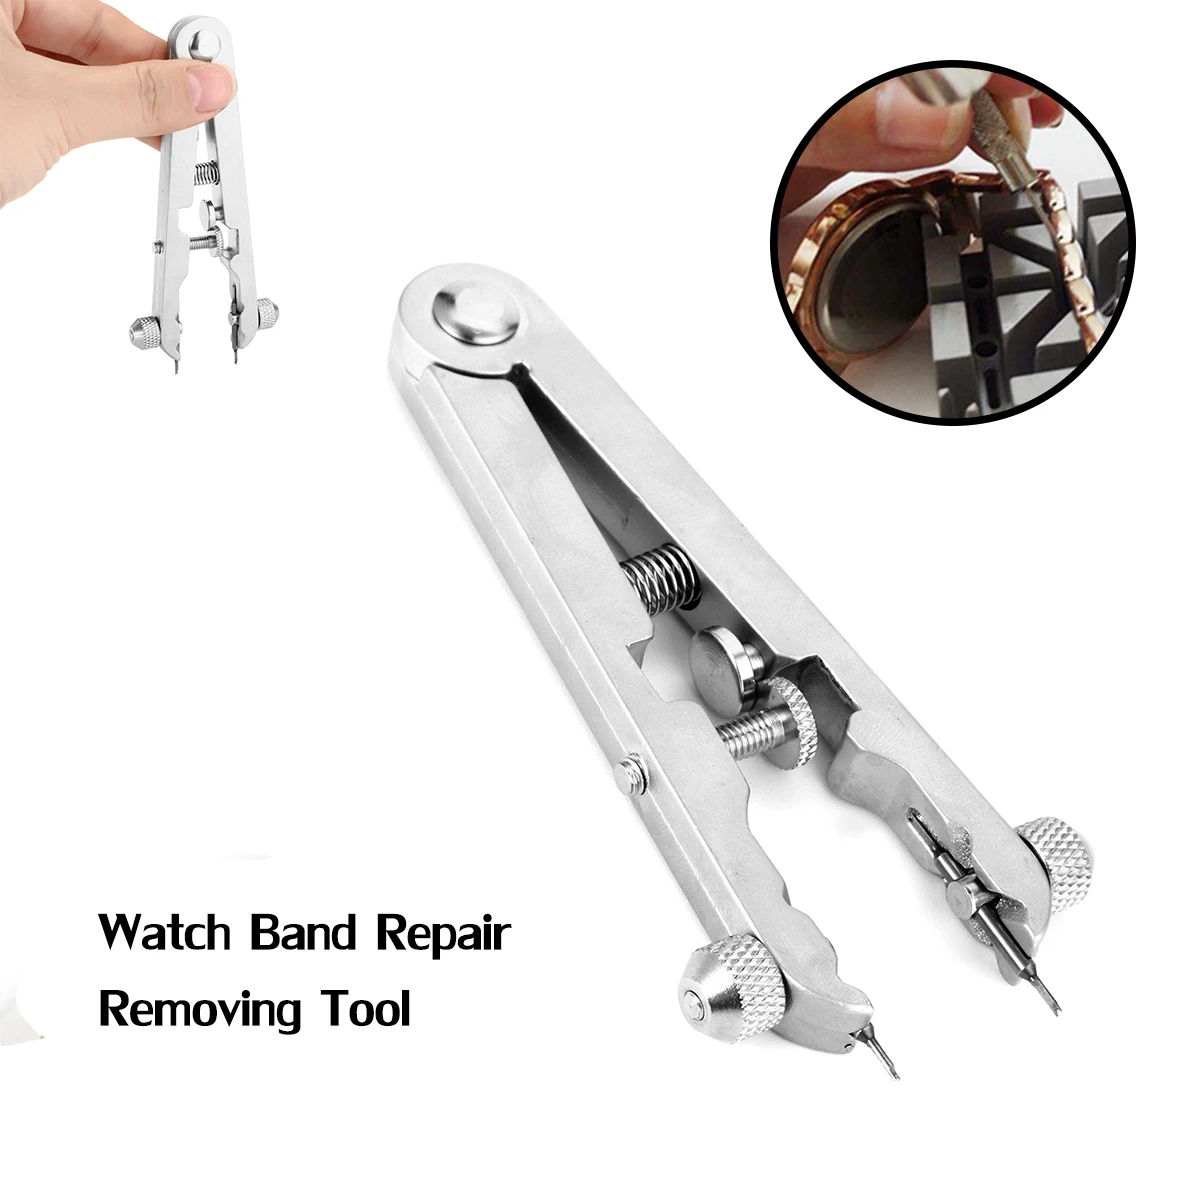 Watch Bracelet Spring Bar 6825 Standard Plier Remover Replace Removing Tool